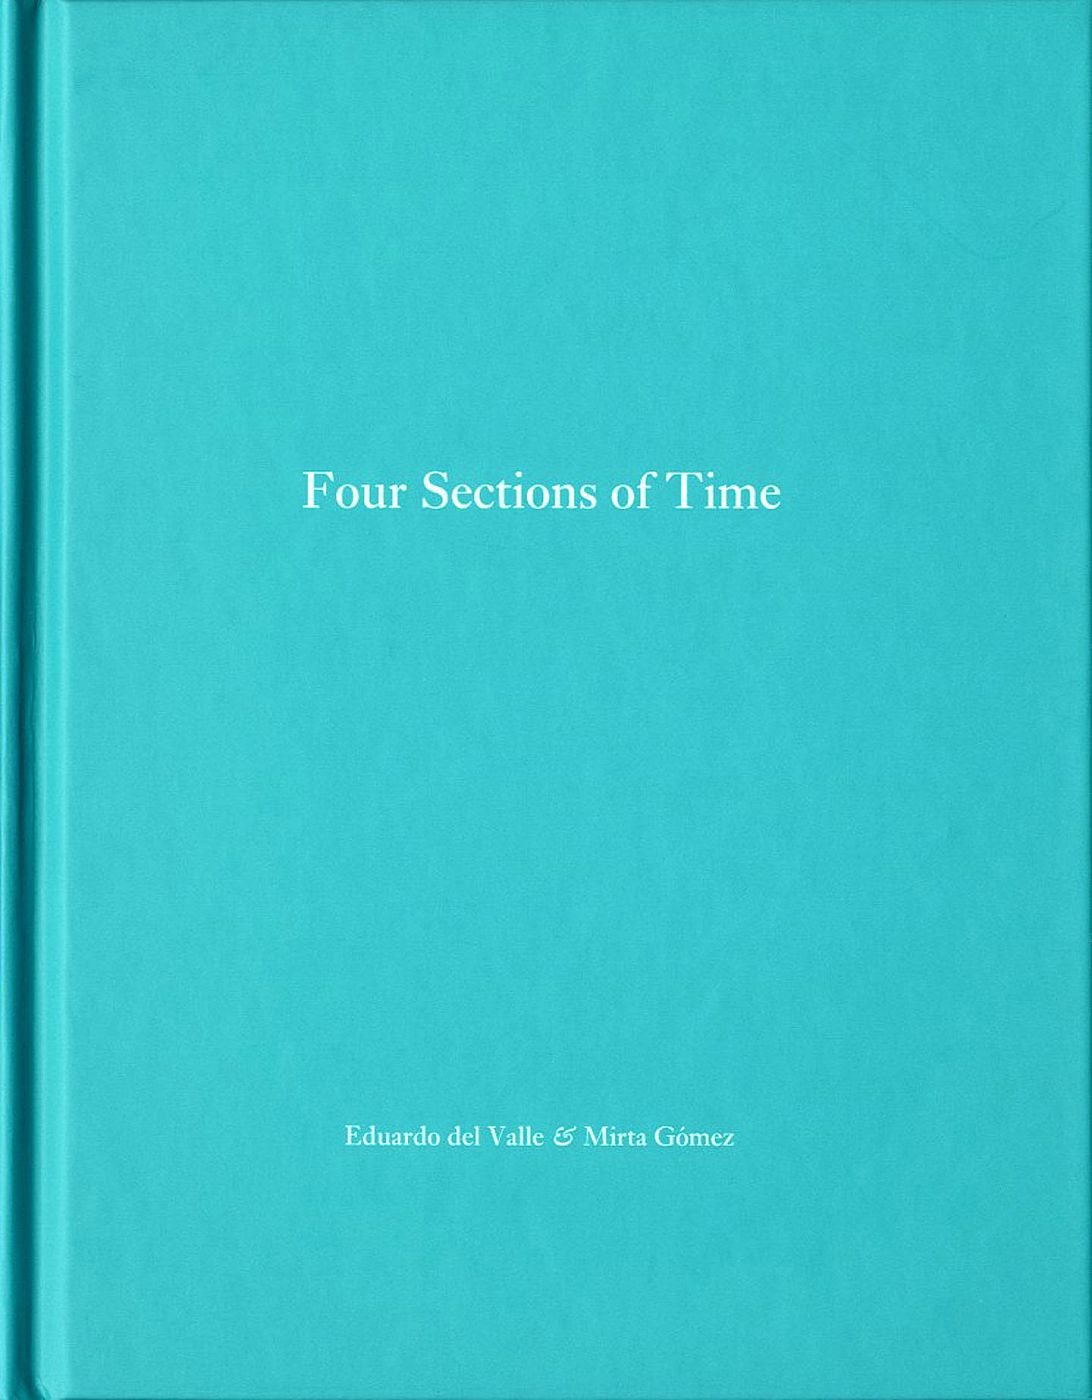 Eduardo del Valle and Mirta Gómez: Four Sections of Time (Complete Set of Four Books) (One Picture Book #22), Limited Edition (with Print)